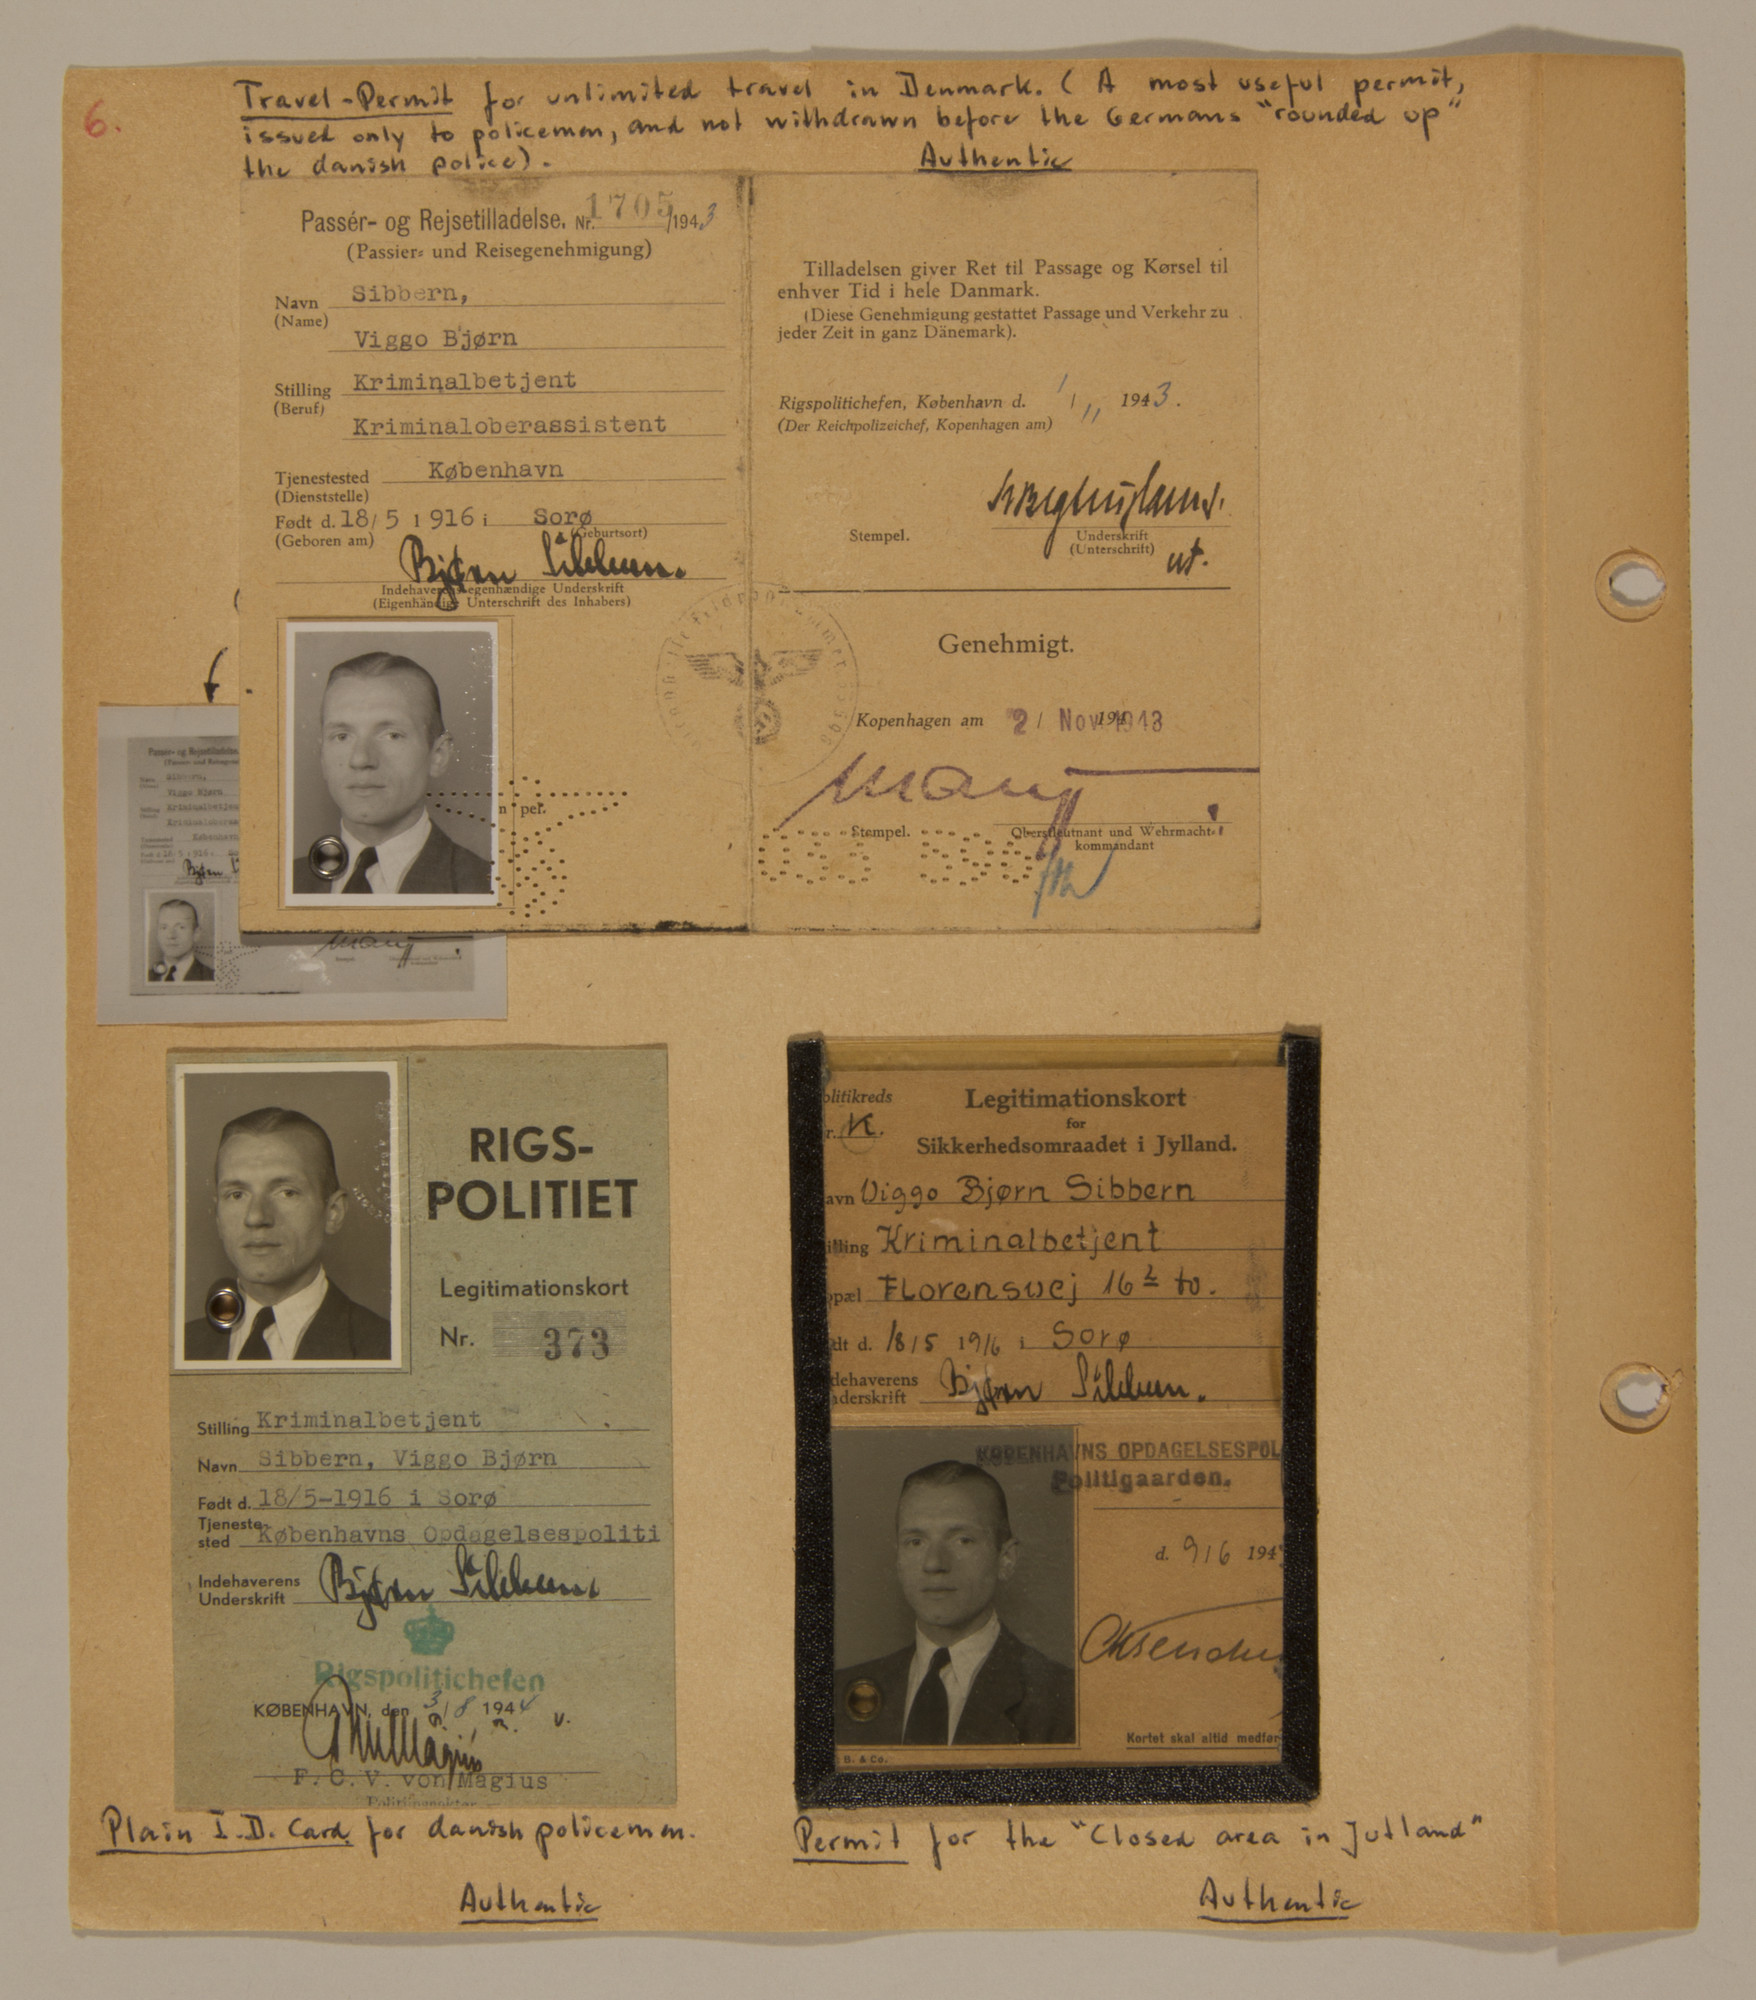 Page from volume three of a set of scrapbooks compiled by Bjorn Sibbern, a Danish policeman and resistance member, documenting the German occupation of Denmark.

This page contains Bjorn Sibbern's authentic identification cards.